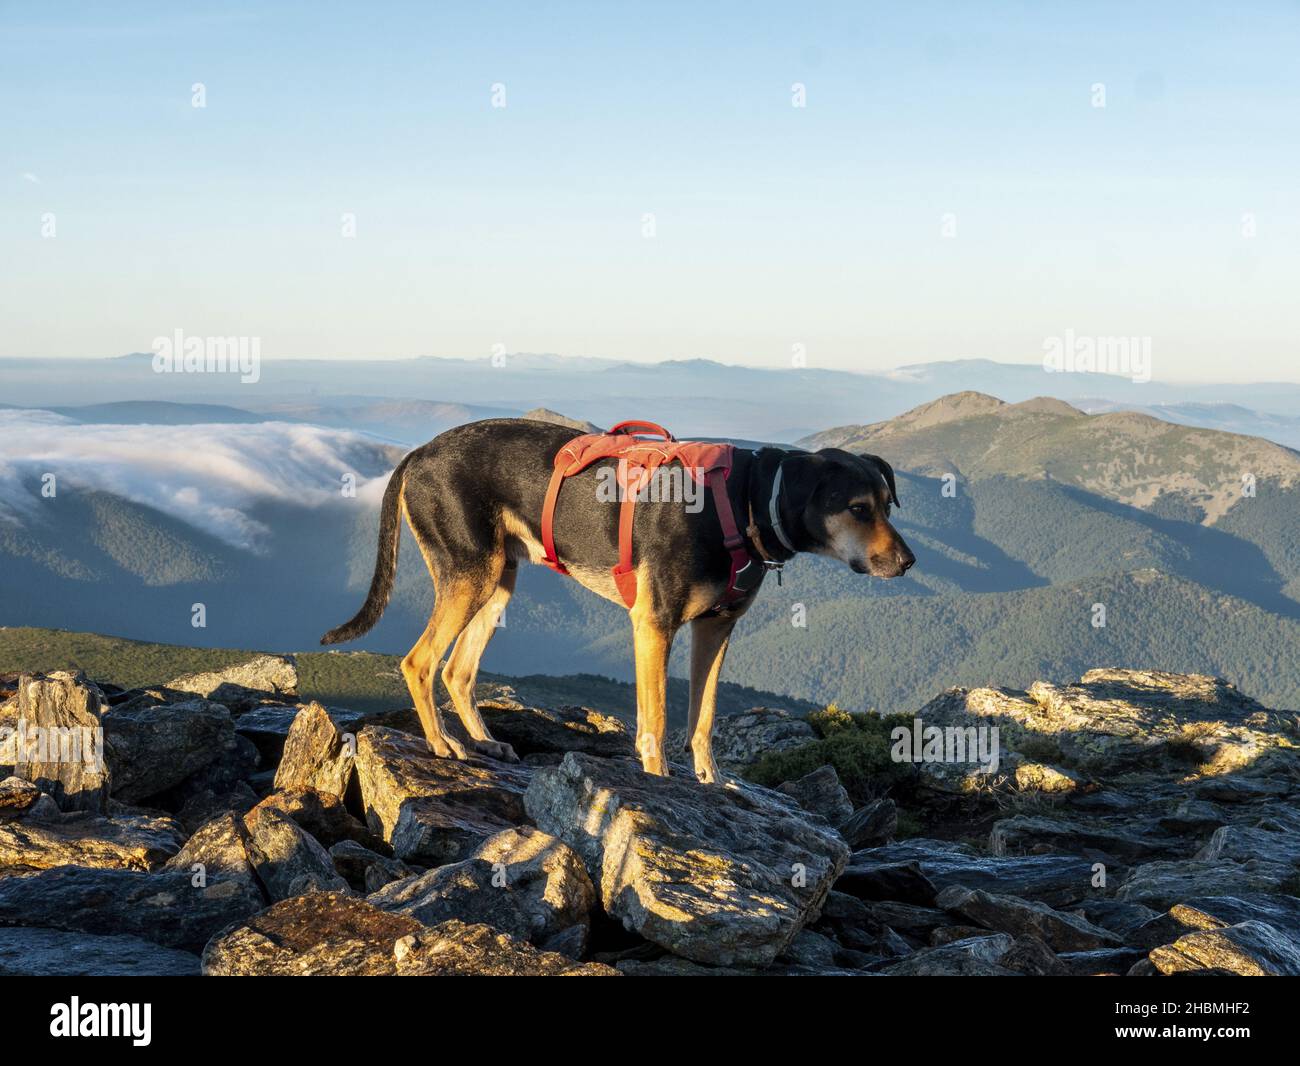 A view of a Huntaway dog on the top of a mountain looking out at sunset against a cloudy sky Stock Photo